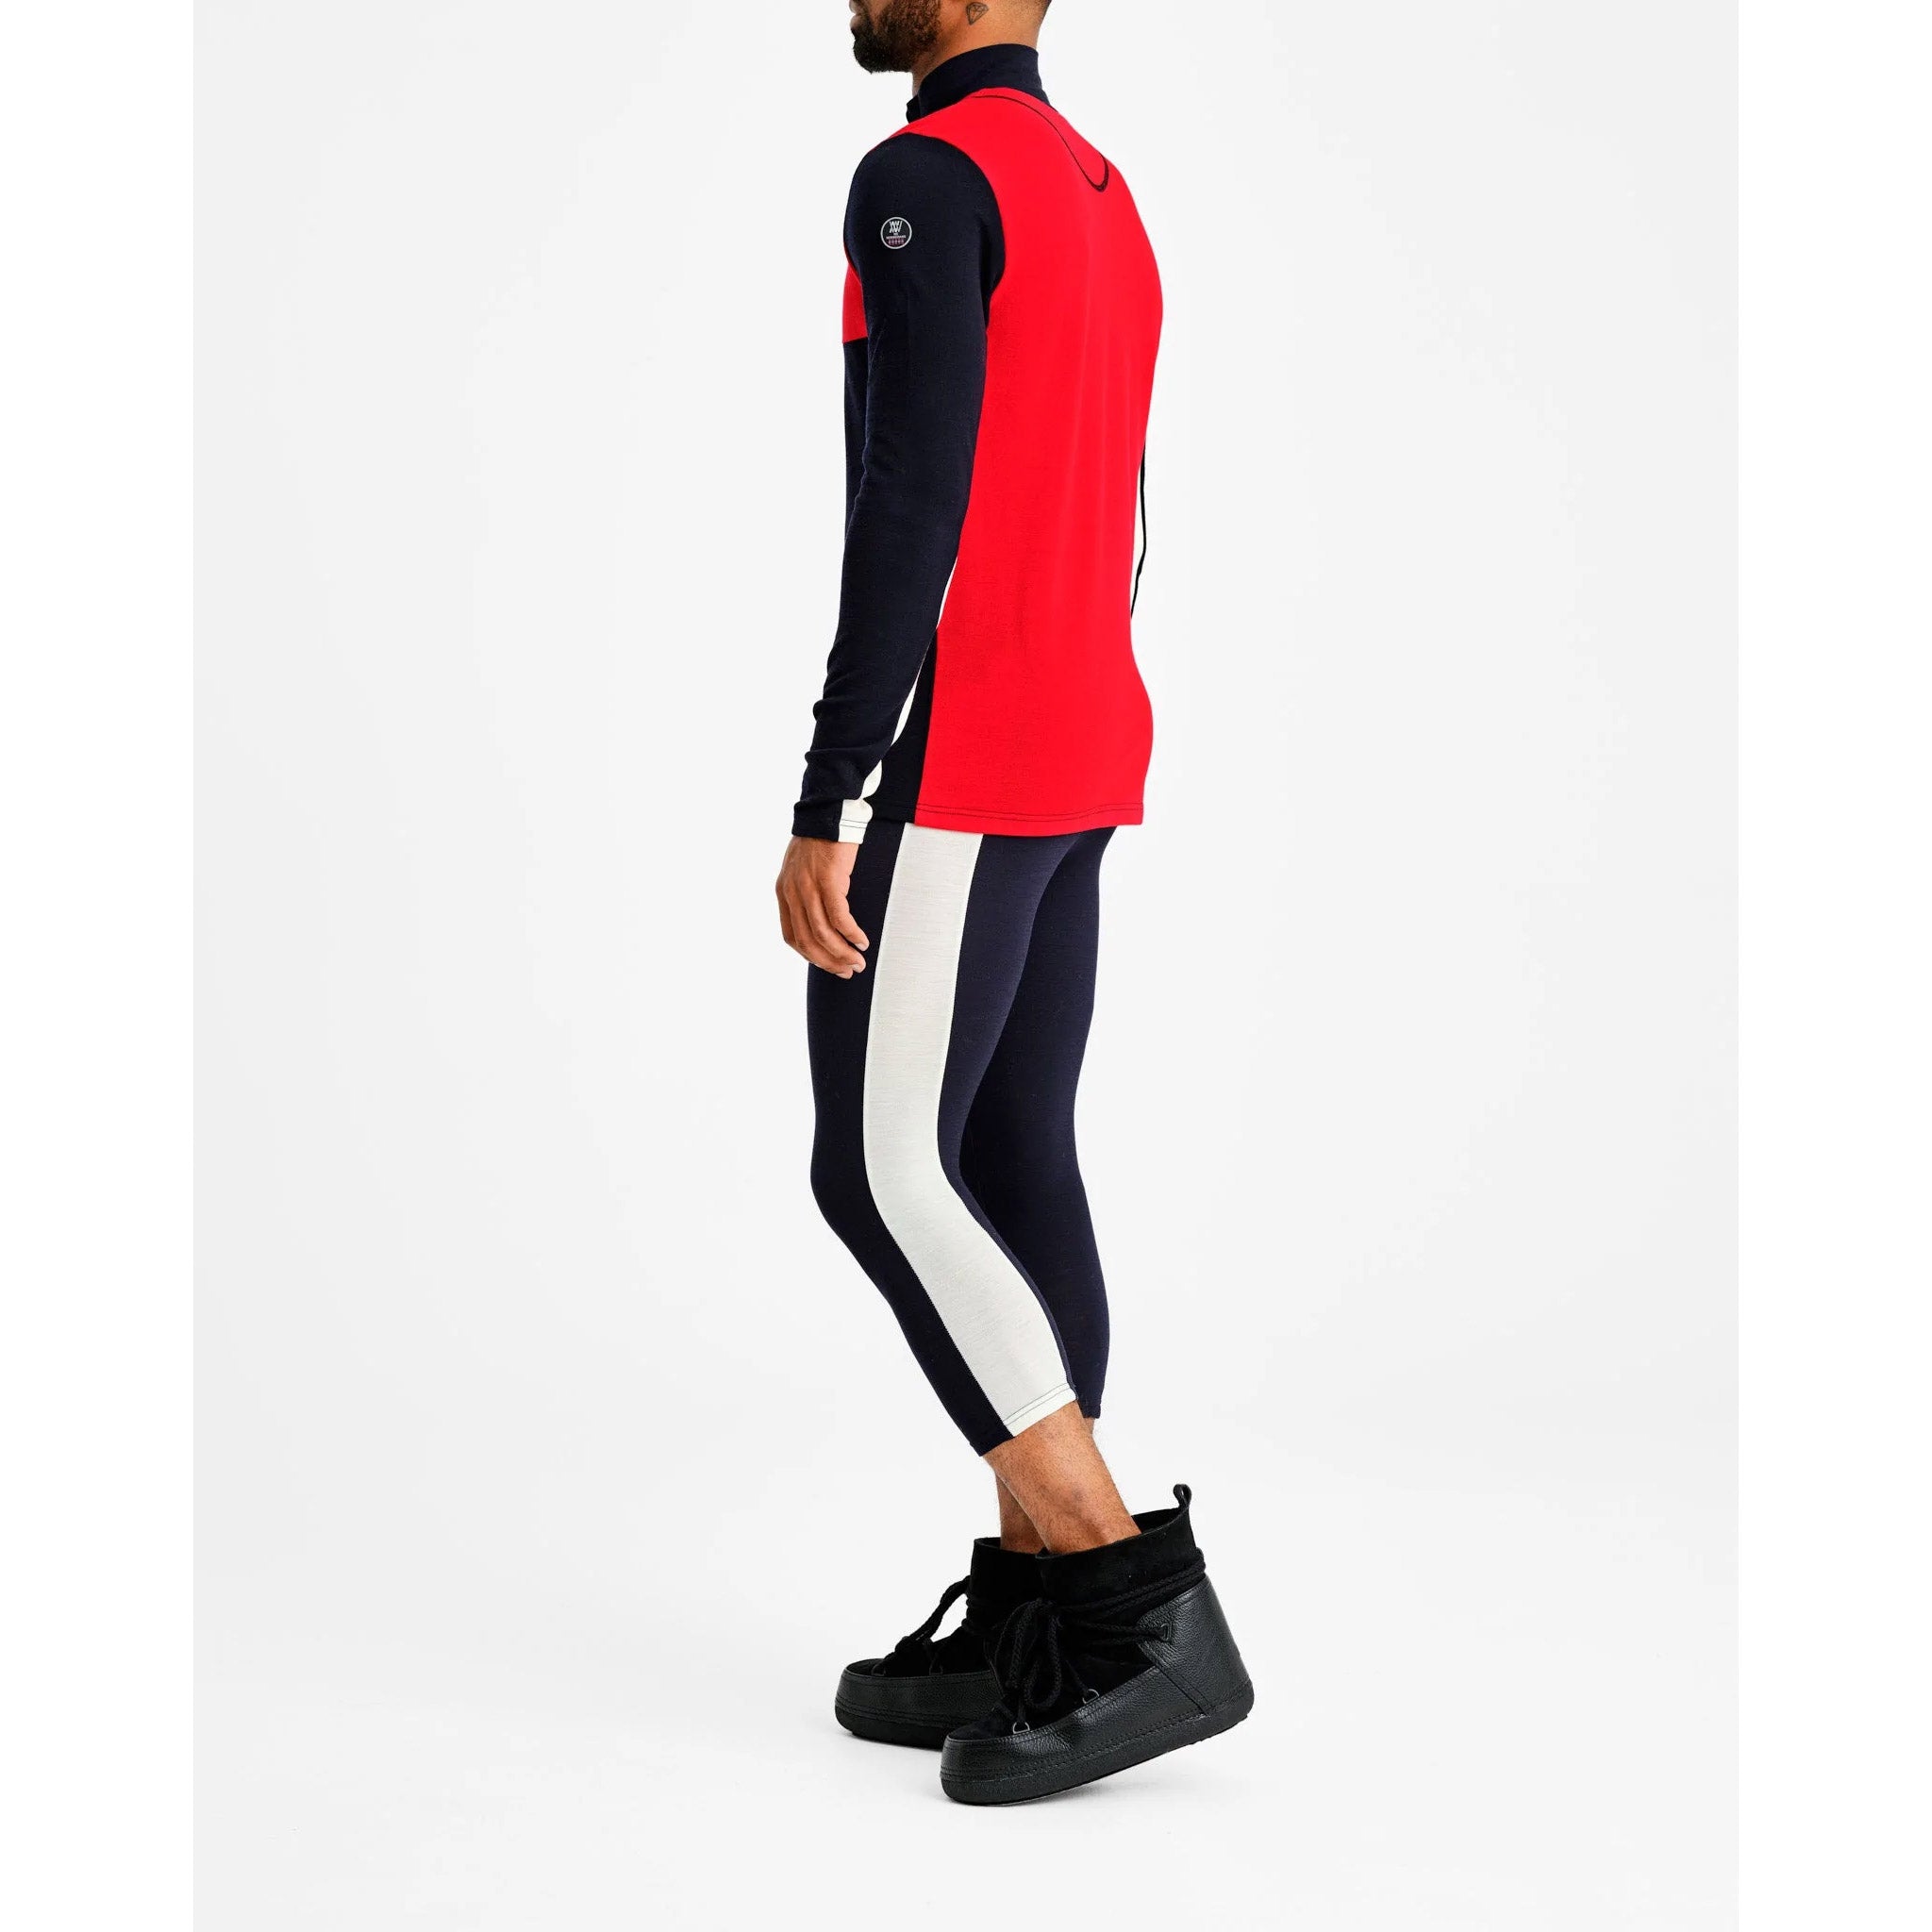 Tryvann Sweater in Navy/Red